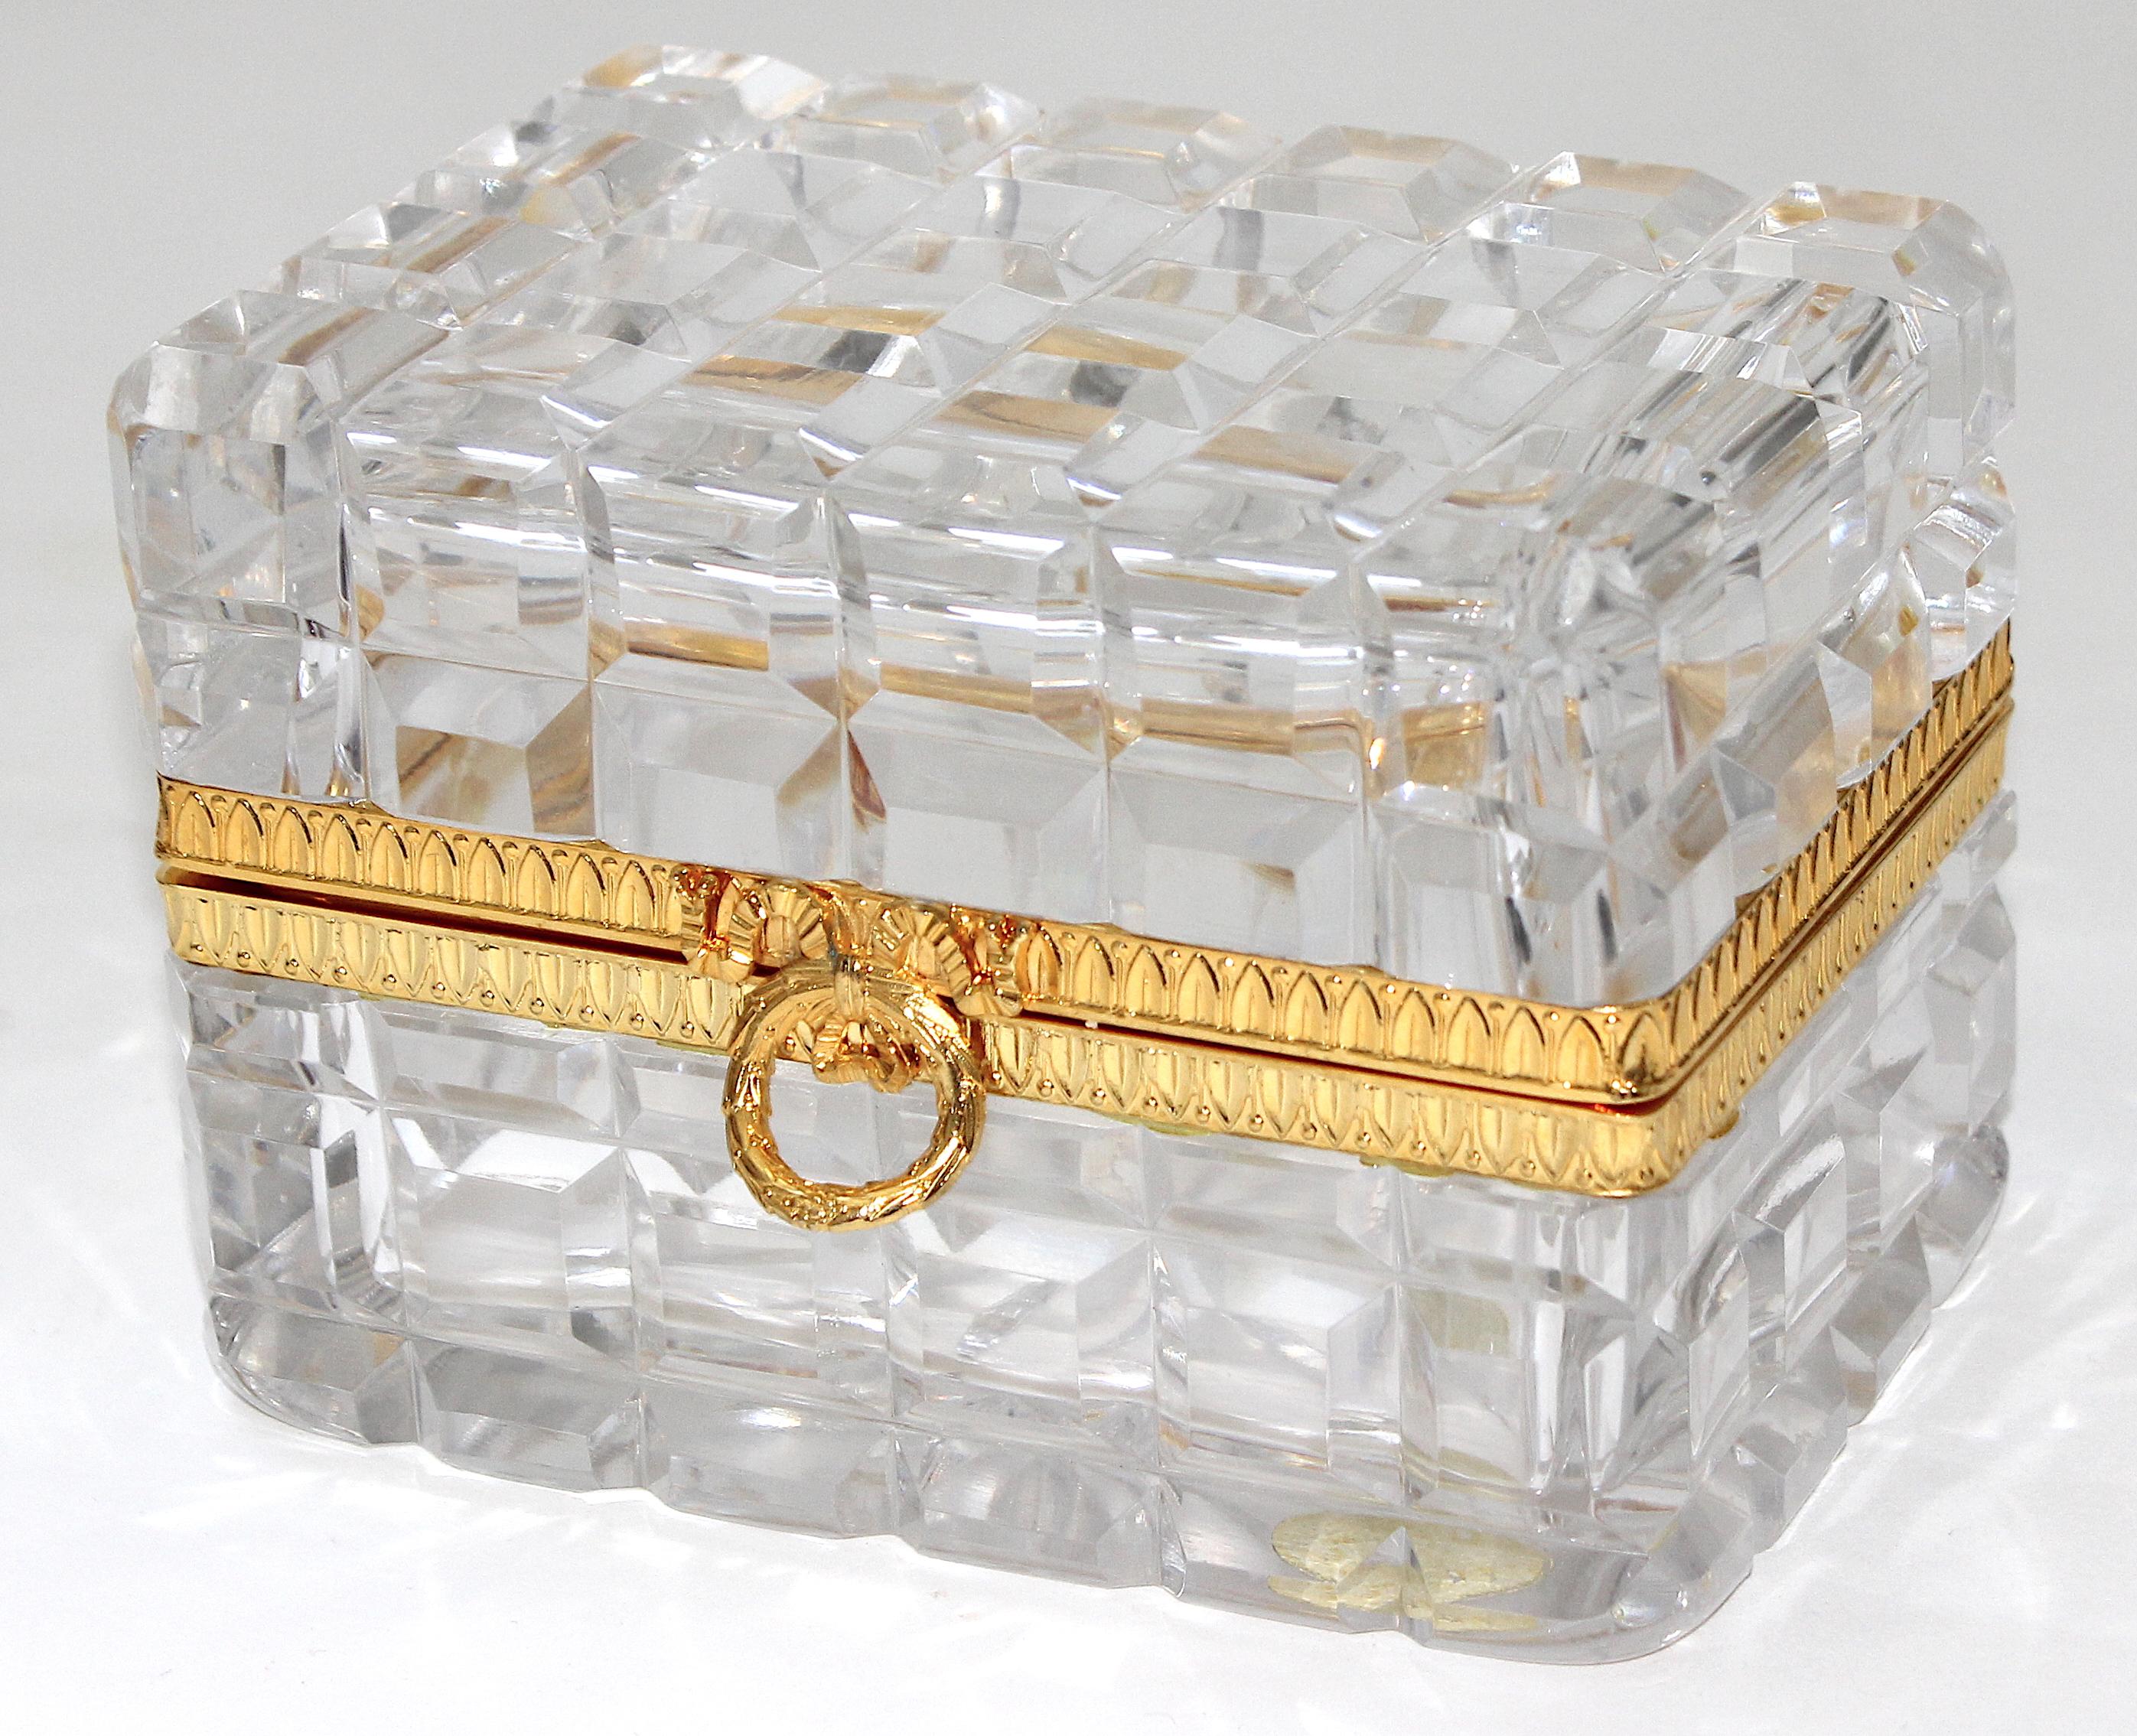 This stylish and chic Baccarat style hand-cut lead crystal and gold-plated box dates to the 1960s and will make a beautiful addition to your dressing table to hold many possibilities.

 Note: The lid opens at about a 45 degree angle. (See Image #7)